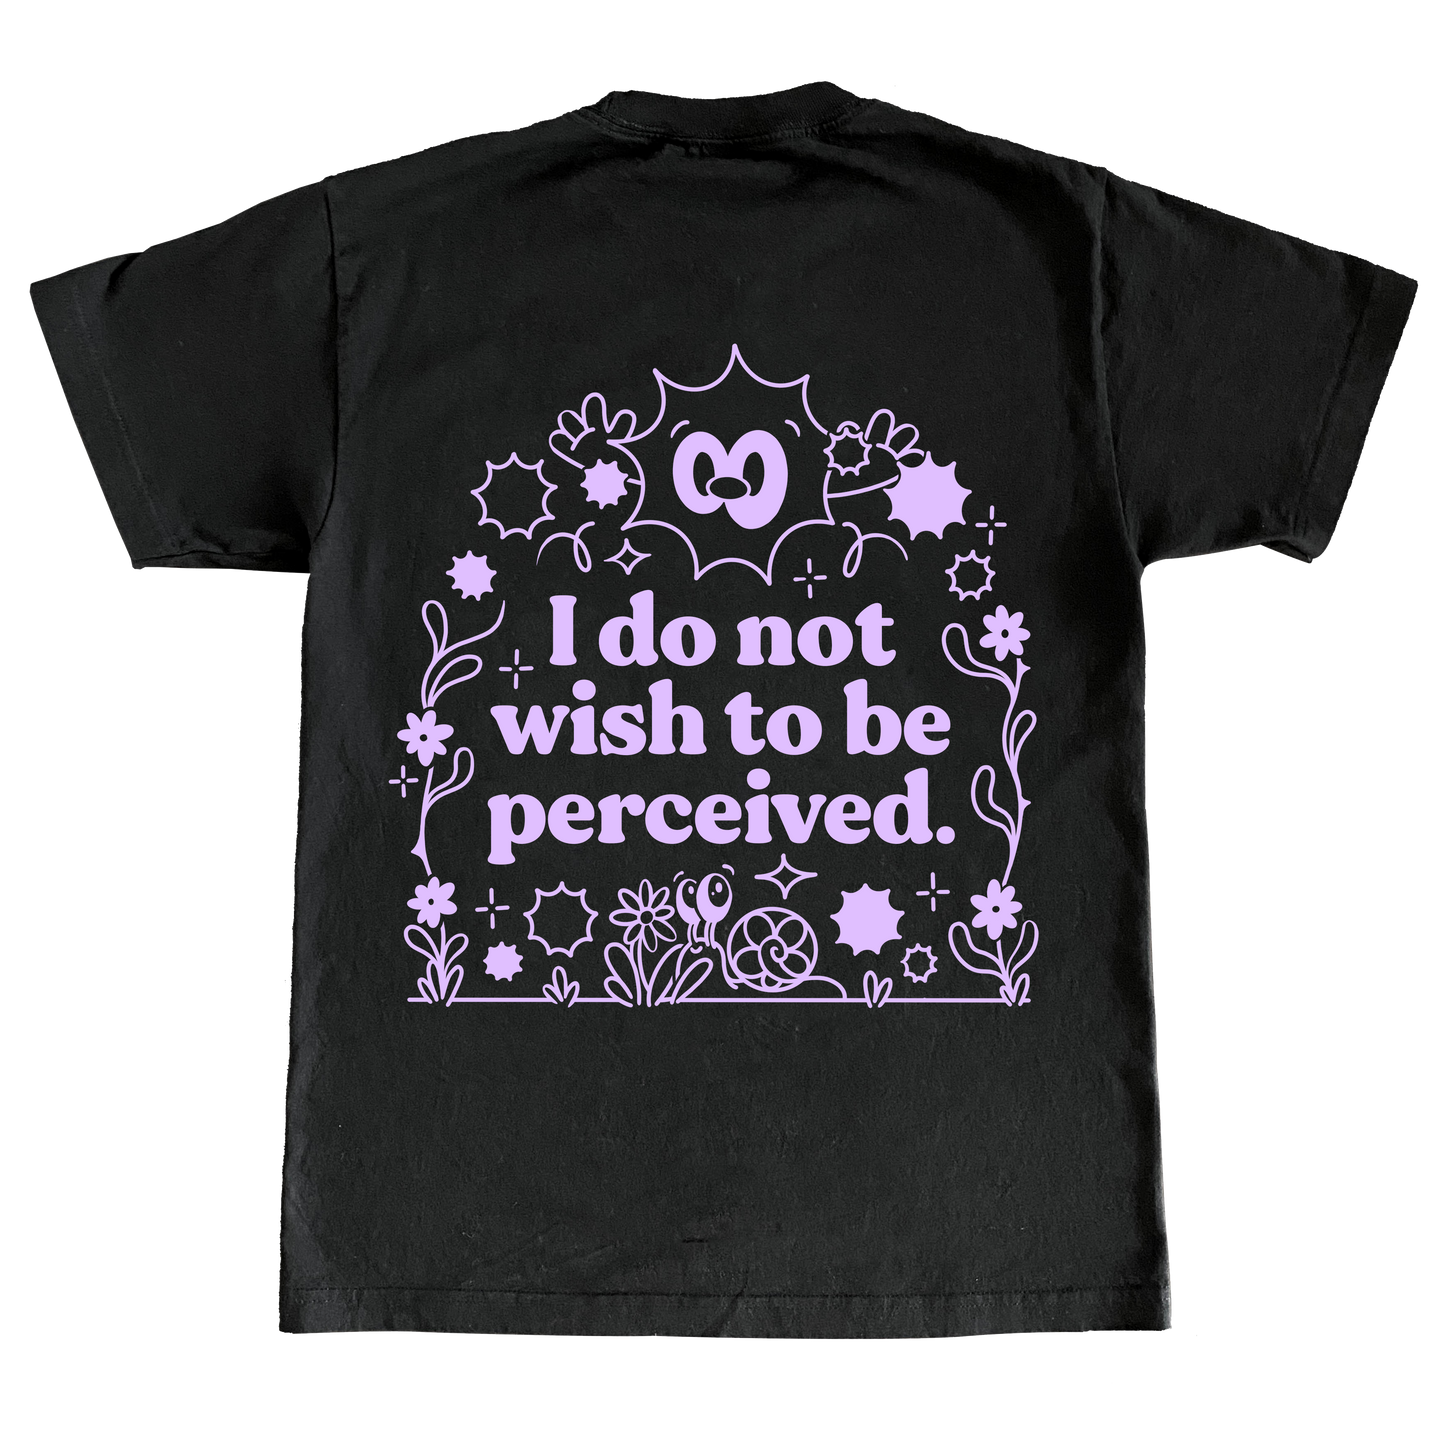 Do Not Perceive Me Black Tee by Bearcubs